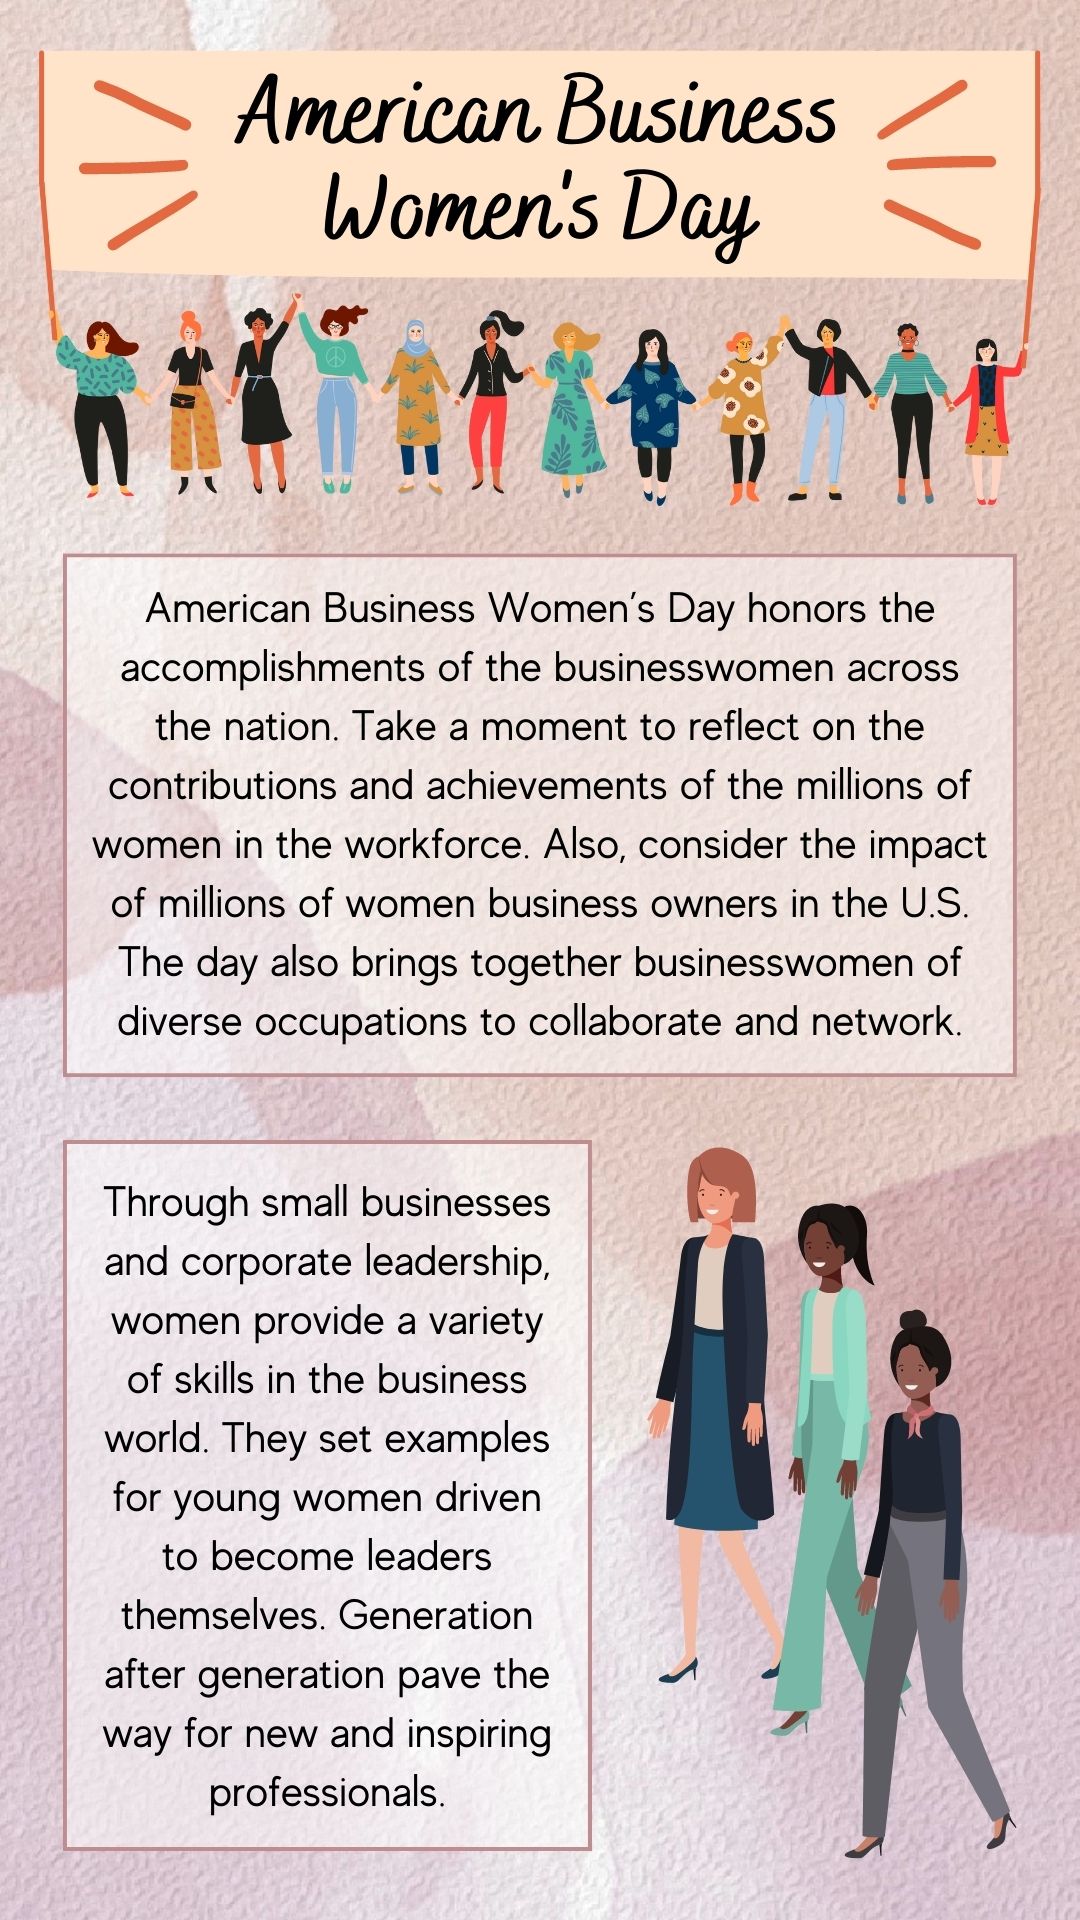 Display event - American Business Women's Day